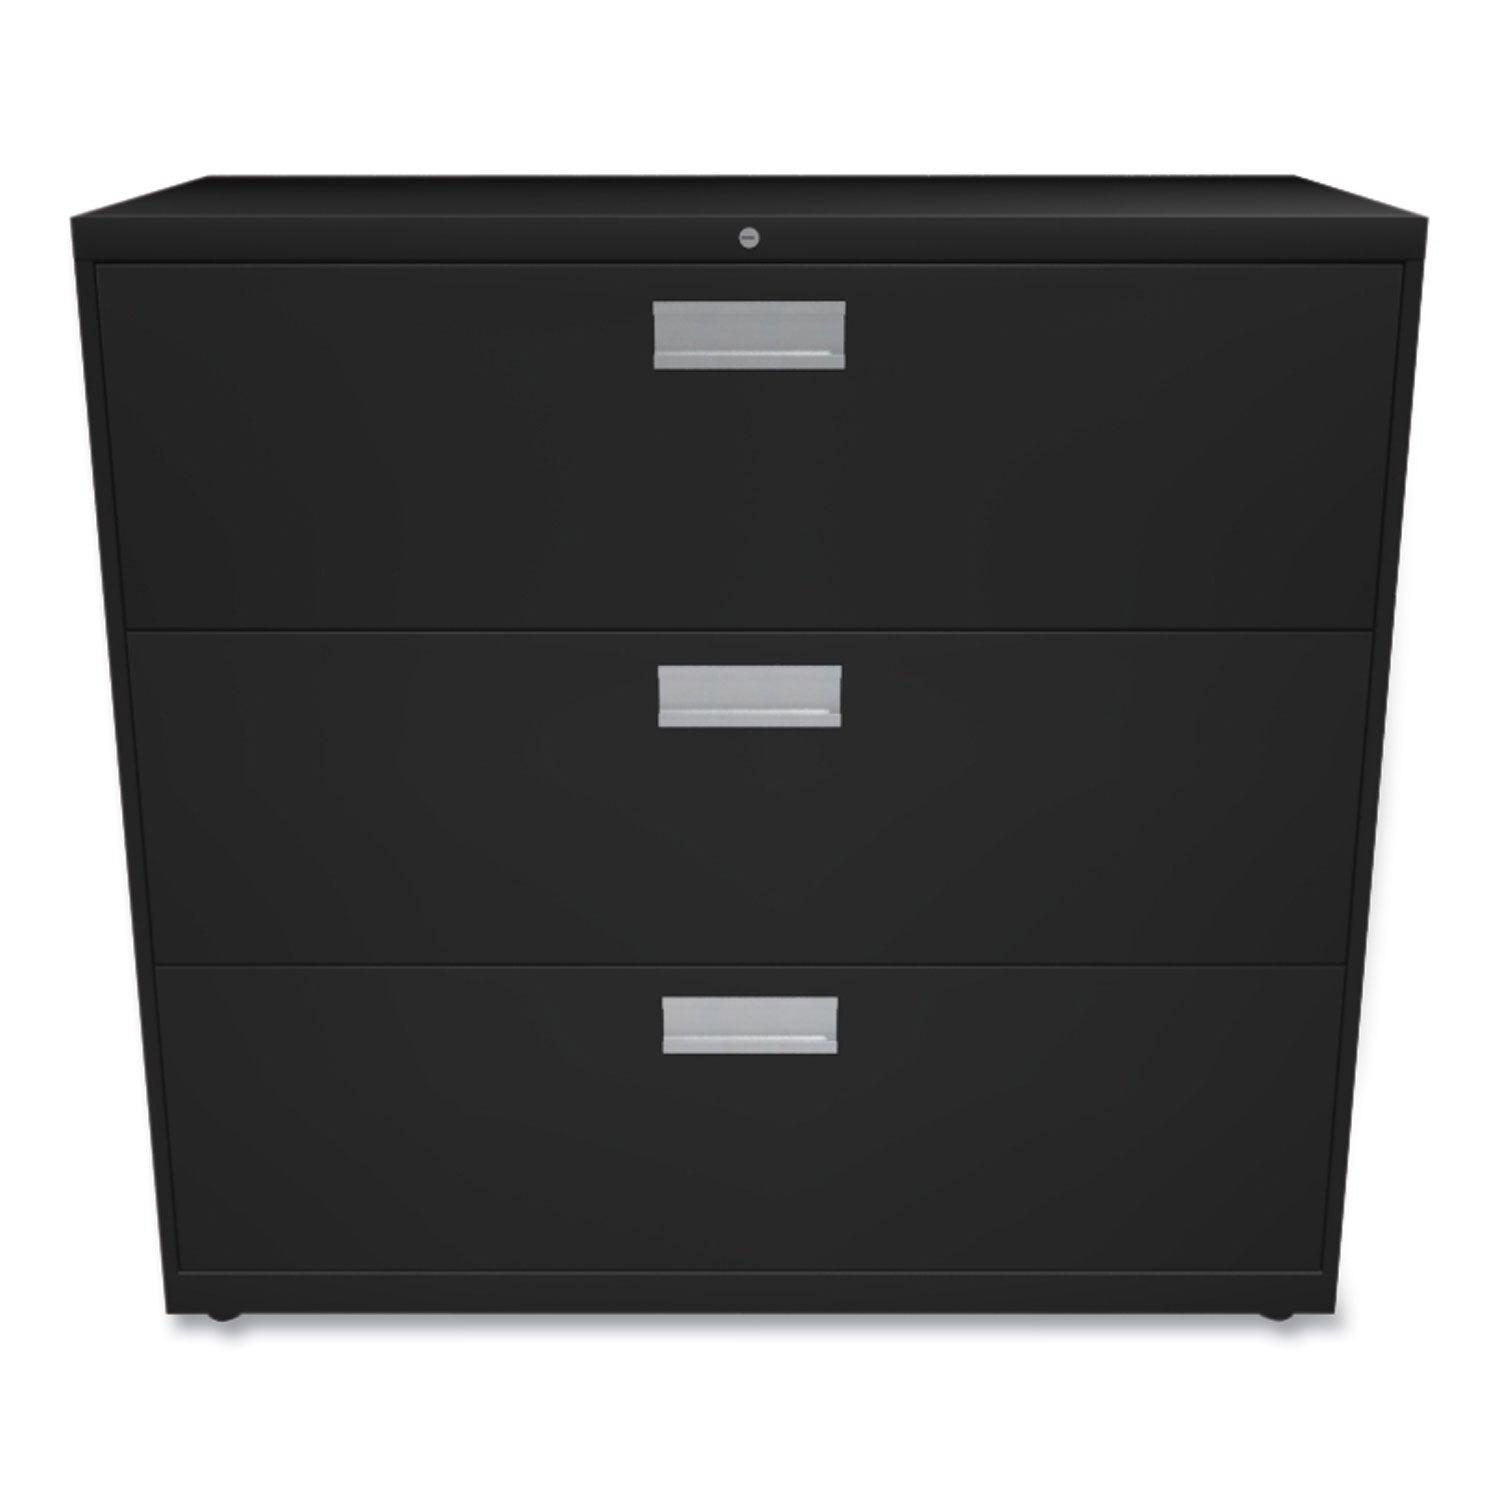 Brigade 600 Series Lateral File, 3 Legal/Letter-Size File Drawers, Black, 42" x 18" x 39.13 - 